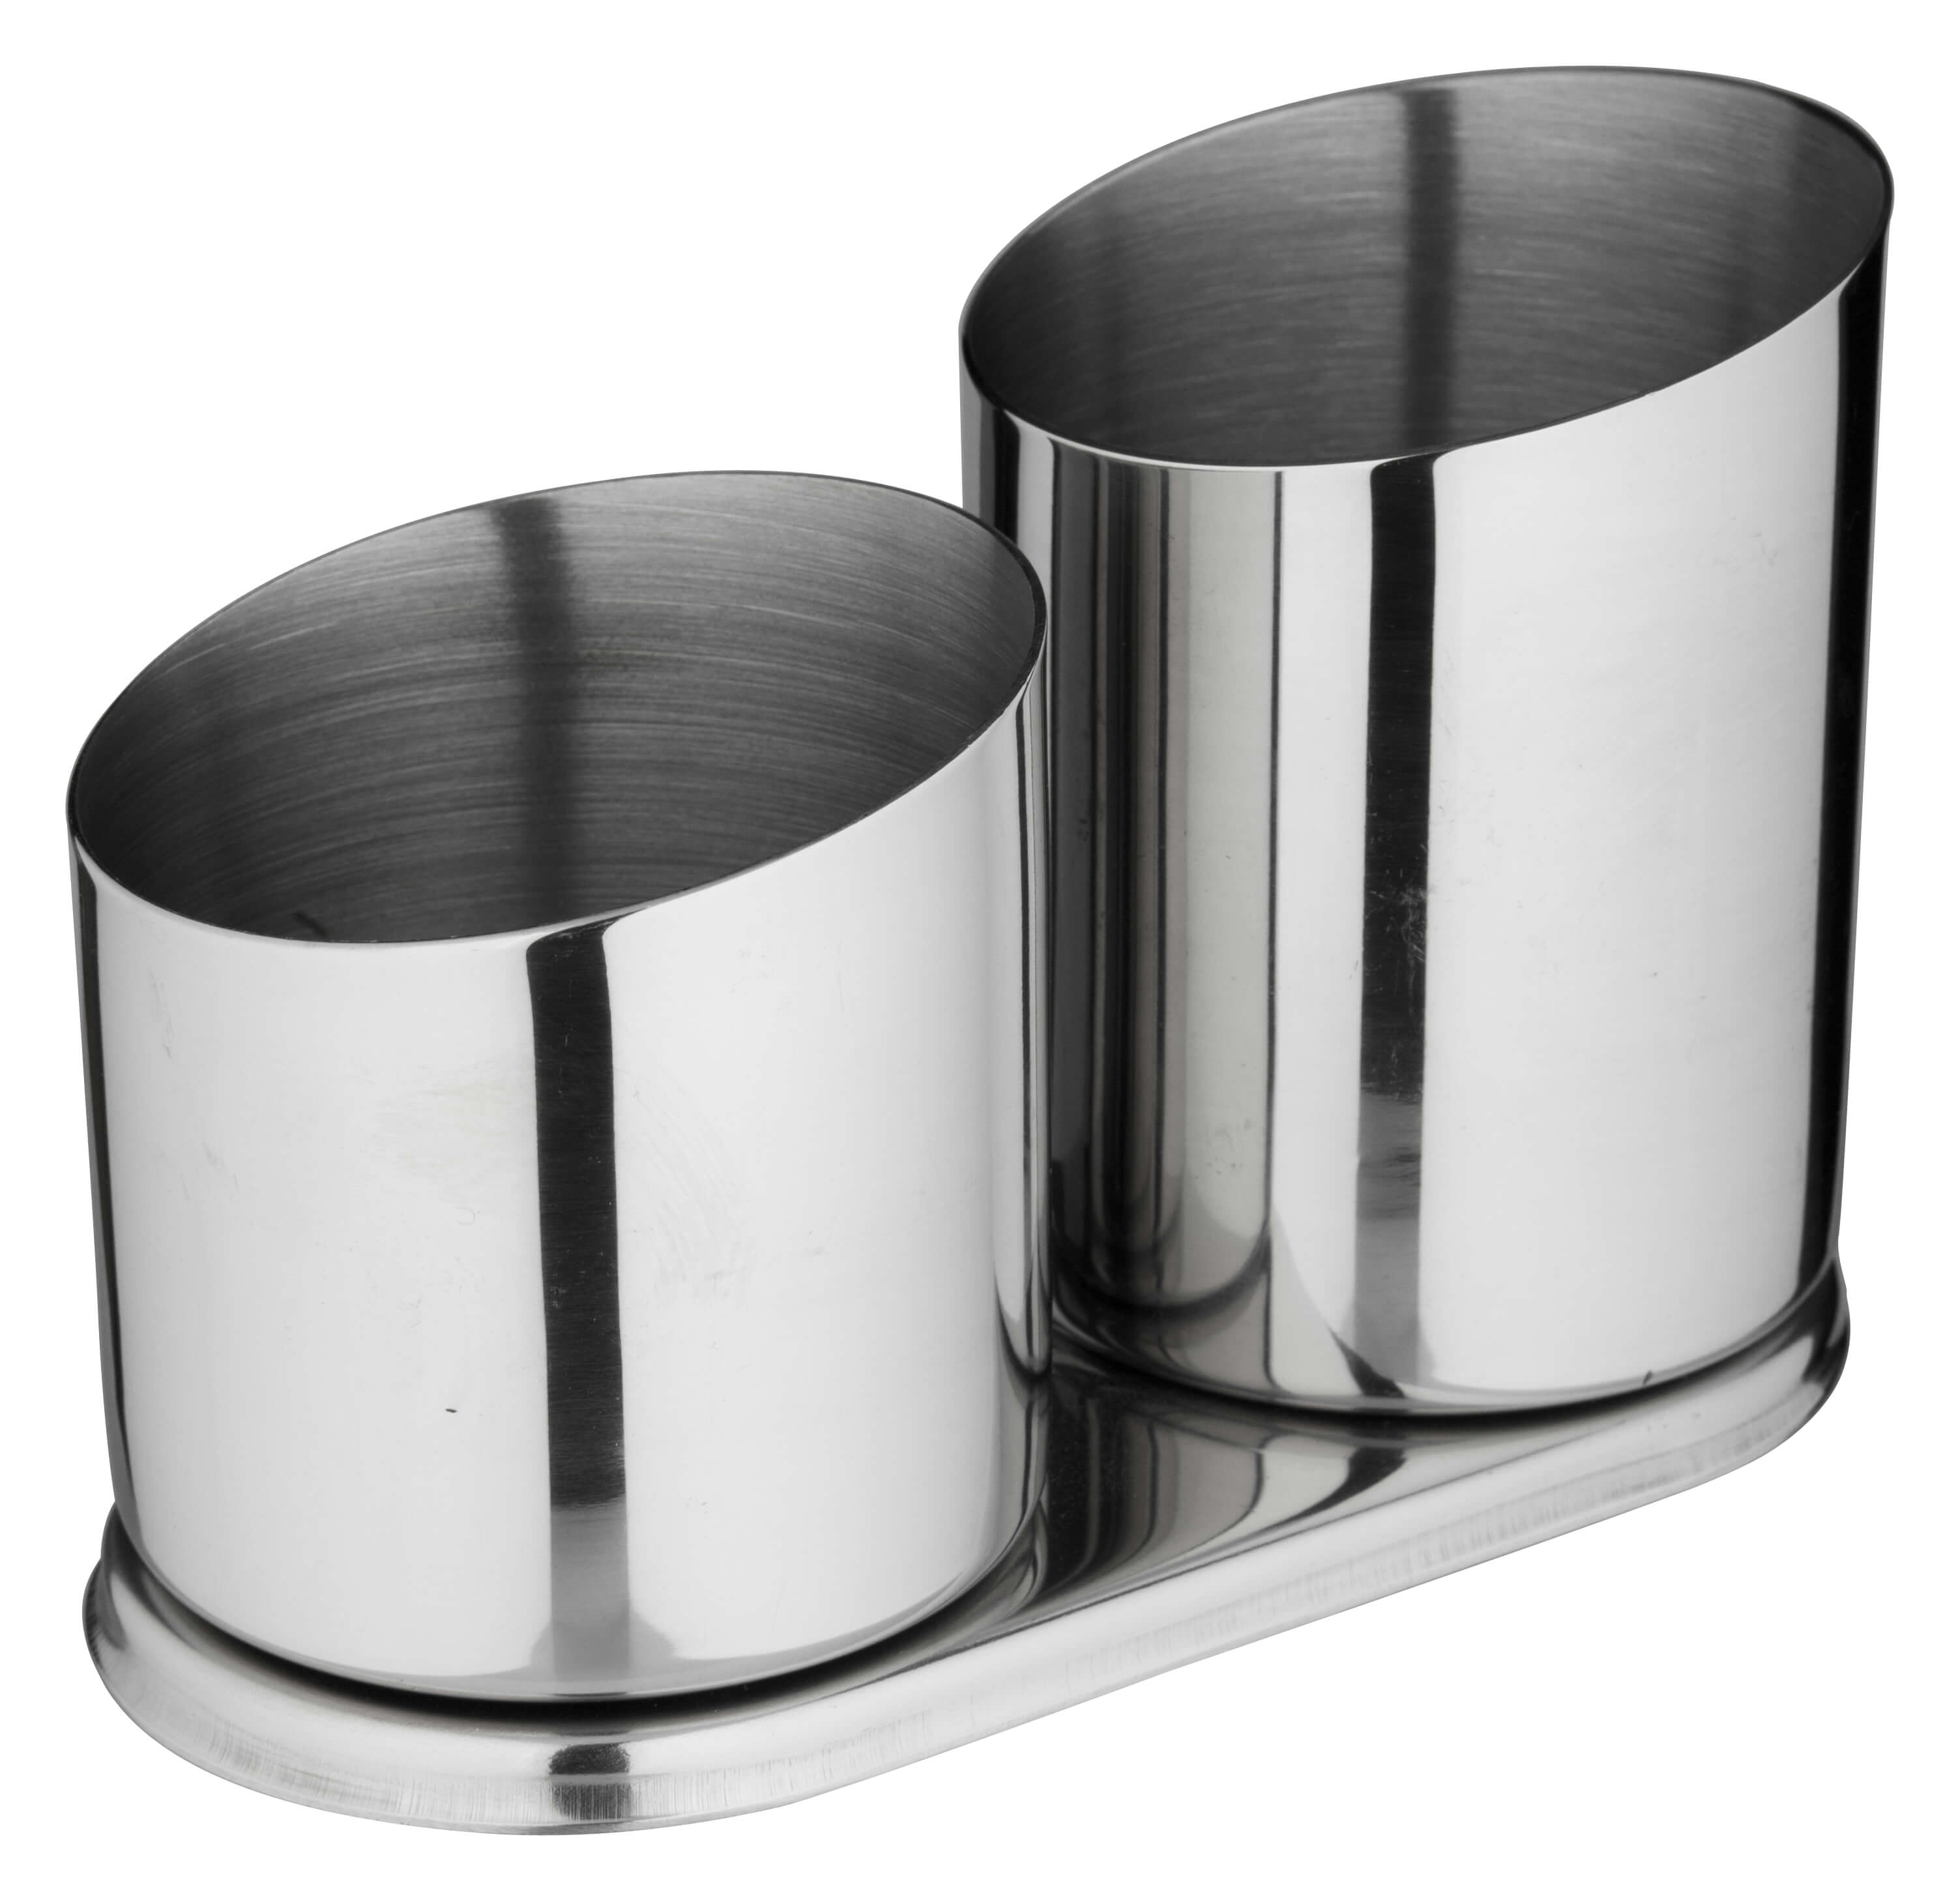 Bar straw holder and cutlery holder, stainless steel - 2 cups